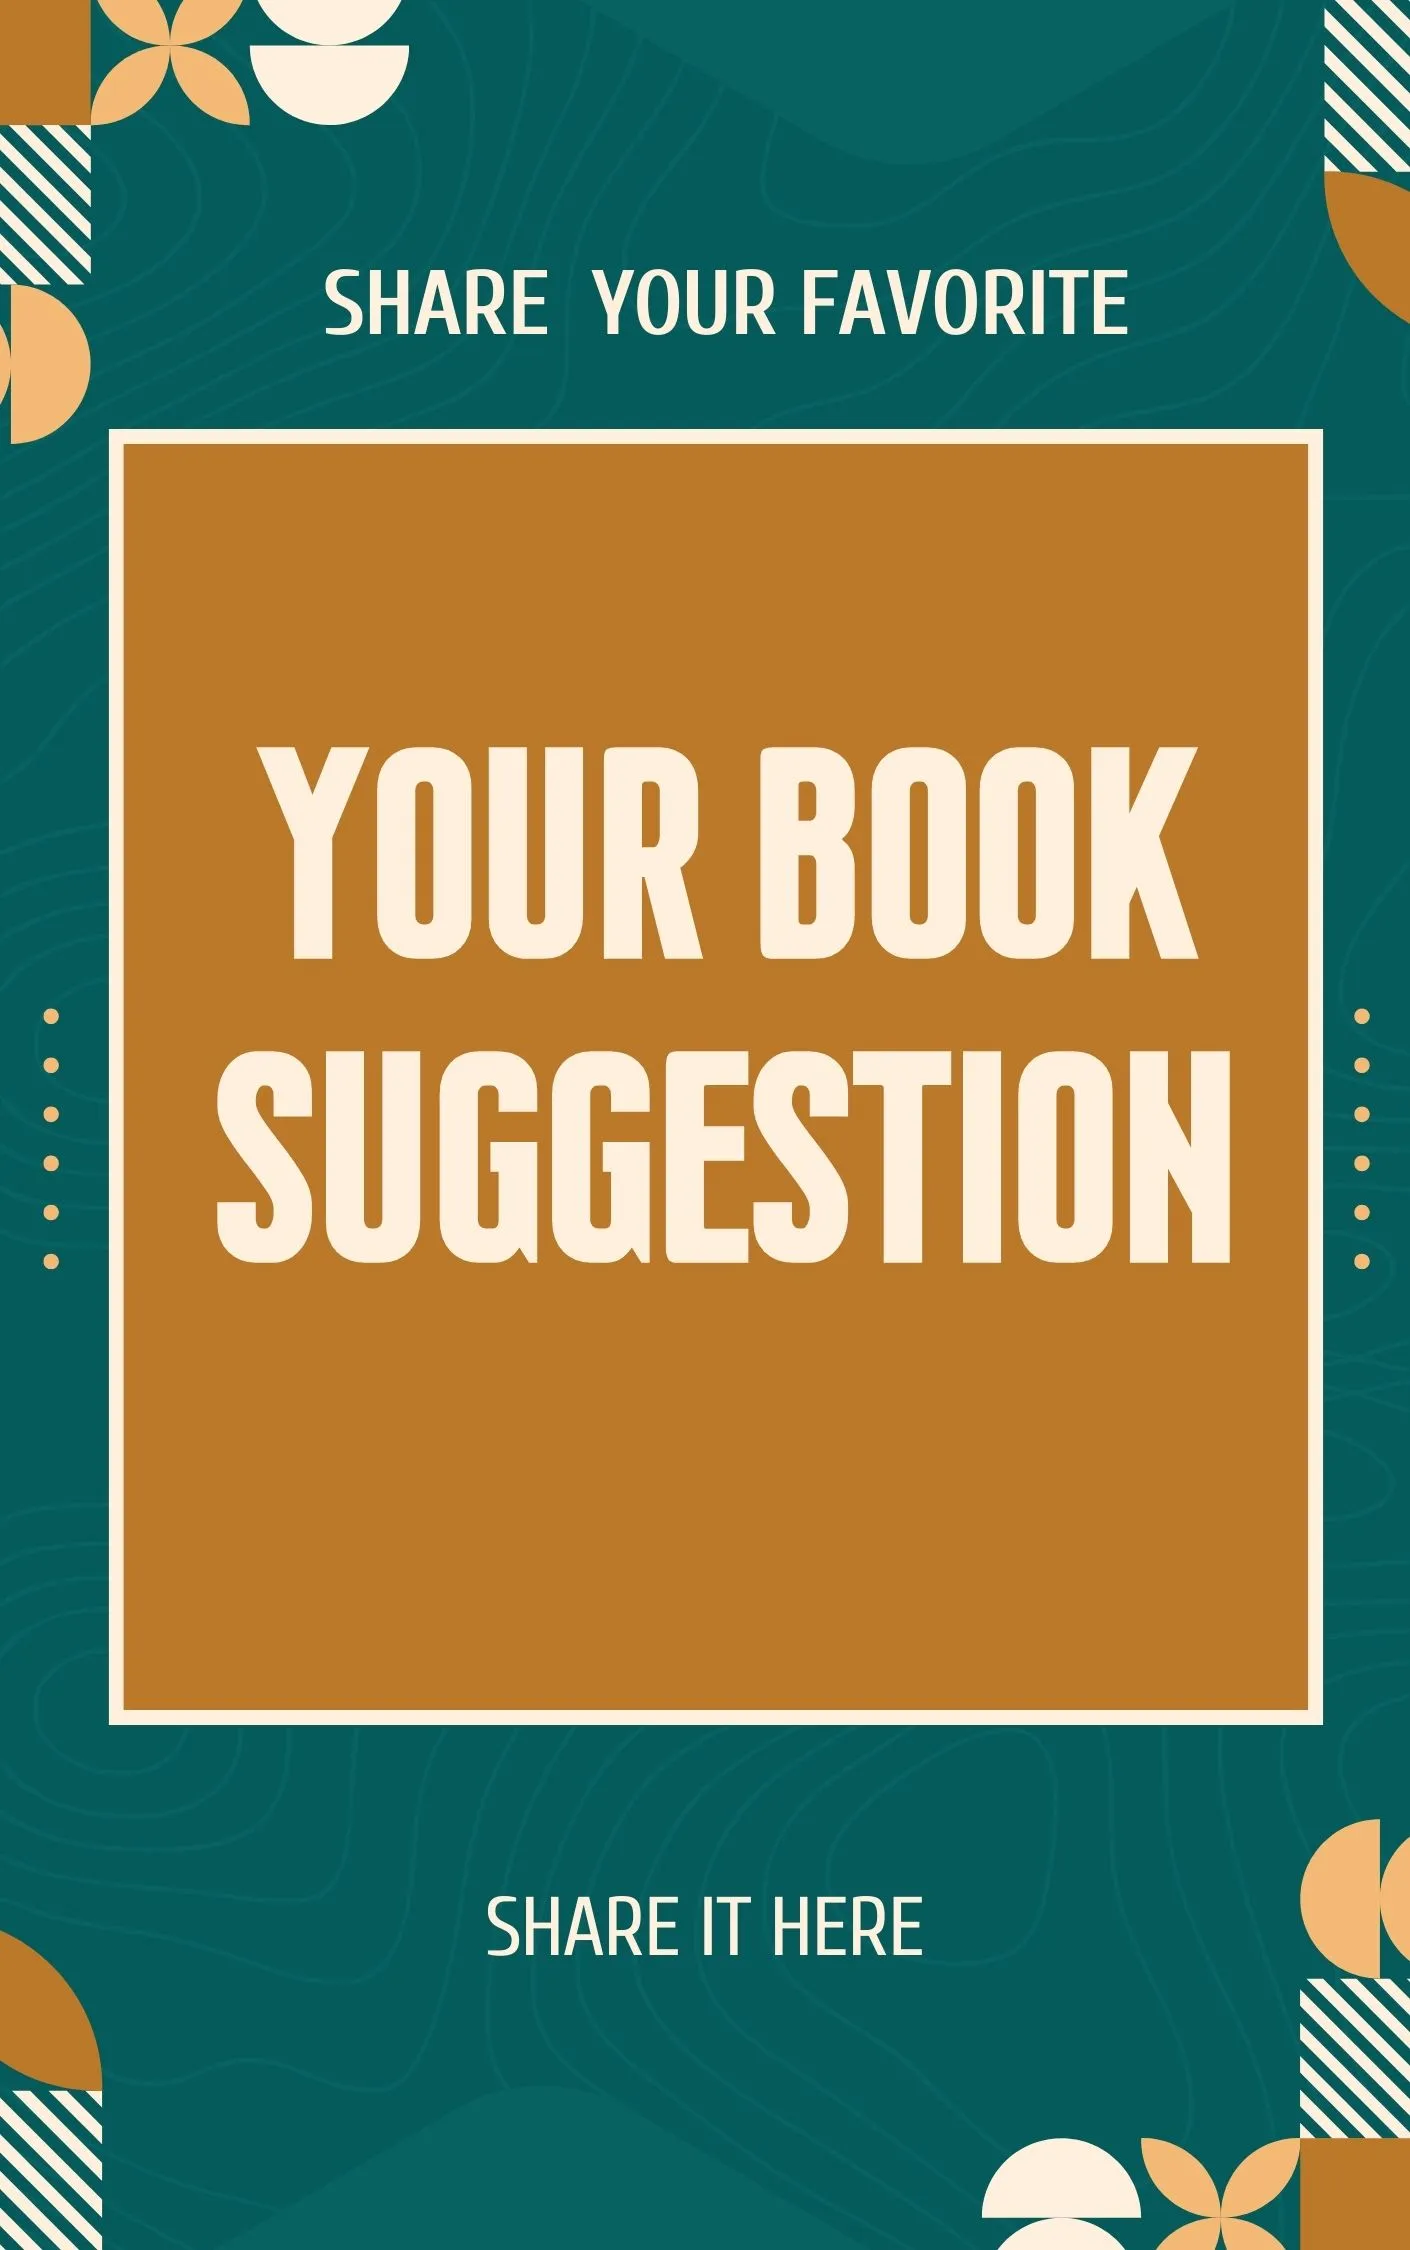 Share your Favorite Business Book 